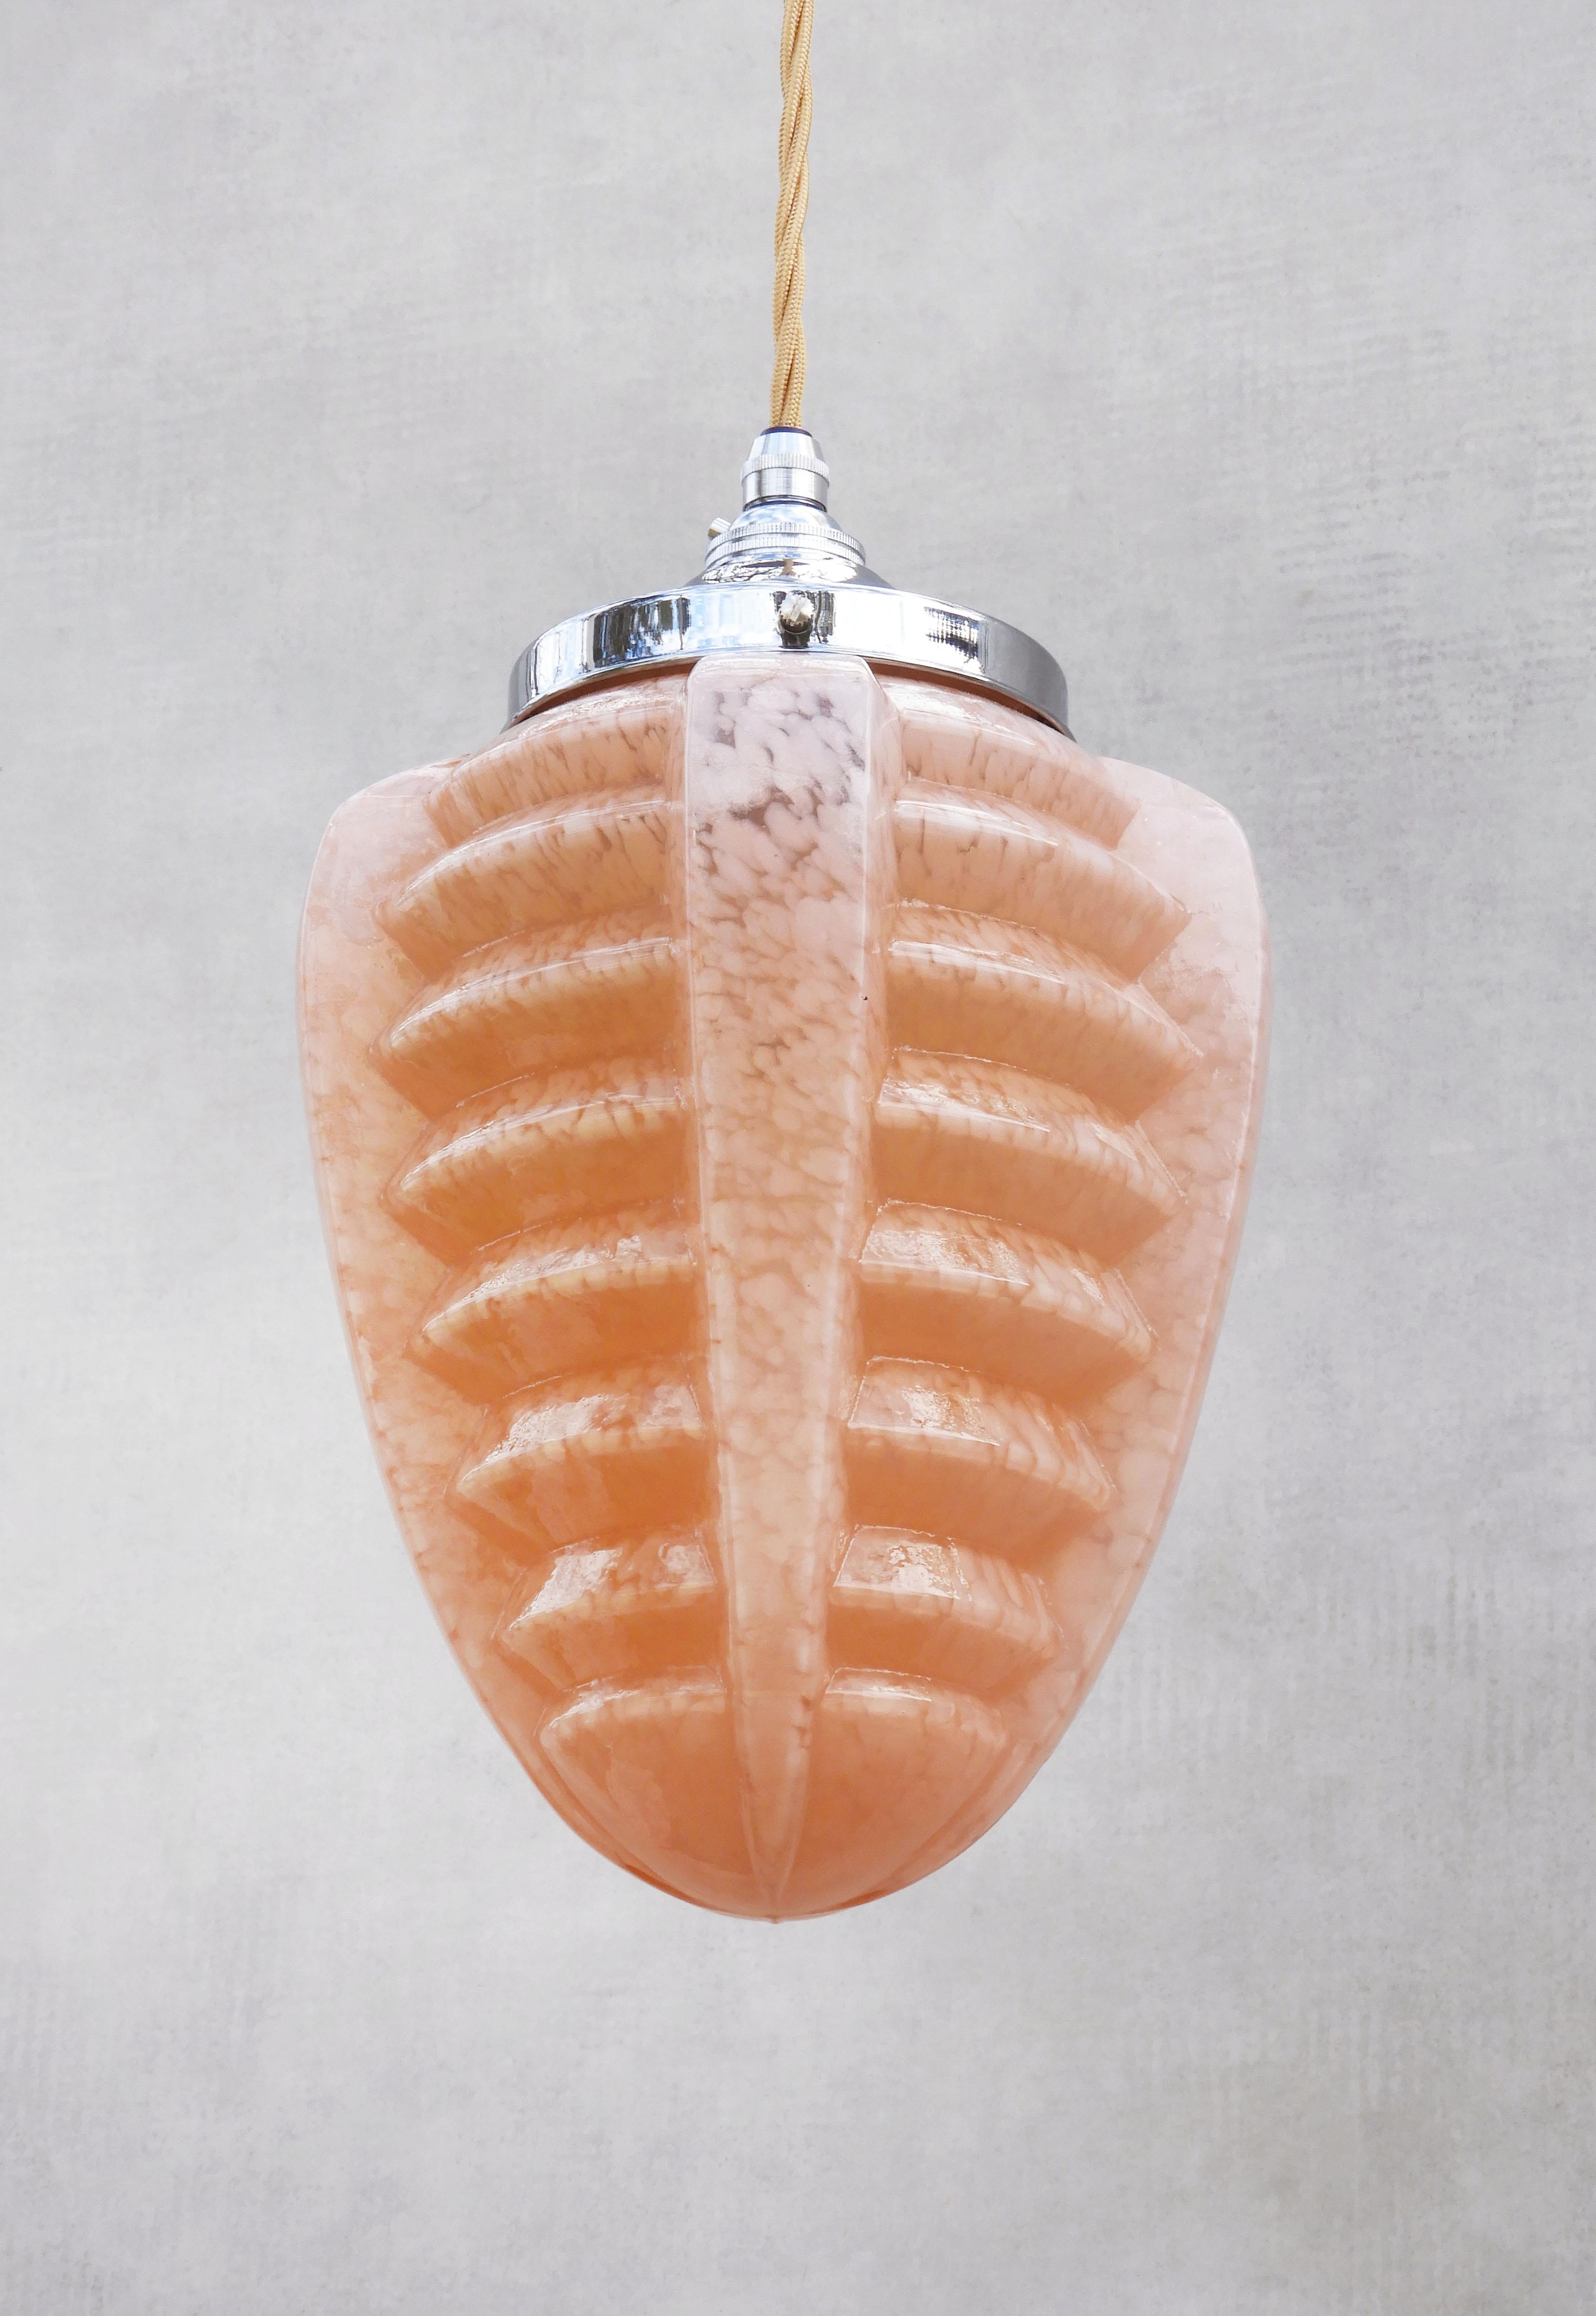 French Art Deco 'Machine Age' Clichy Glass Pendant Light C1930.
Glossy stepped peach pink mottled glass shade with new chromed gallery mount. 
In good condition with no losses to glass. Professionally rewired with all new electrical components,